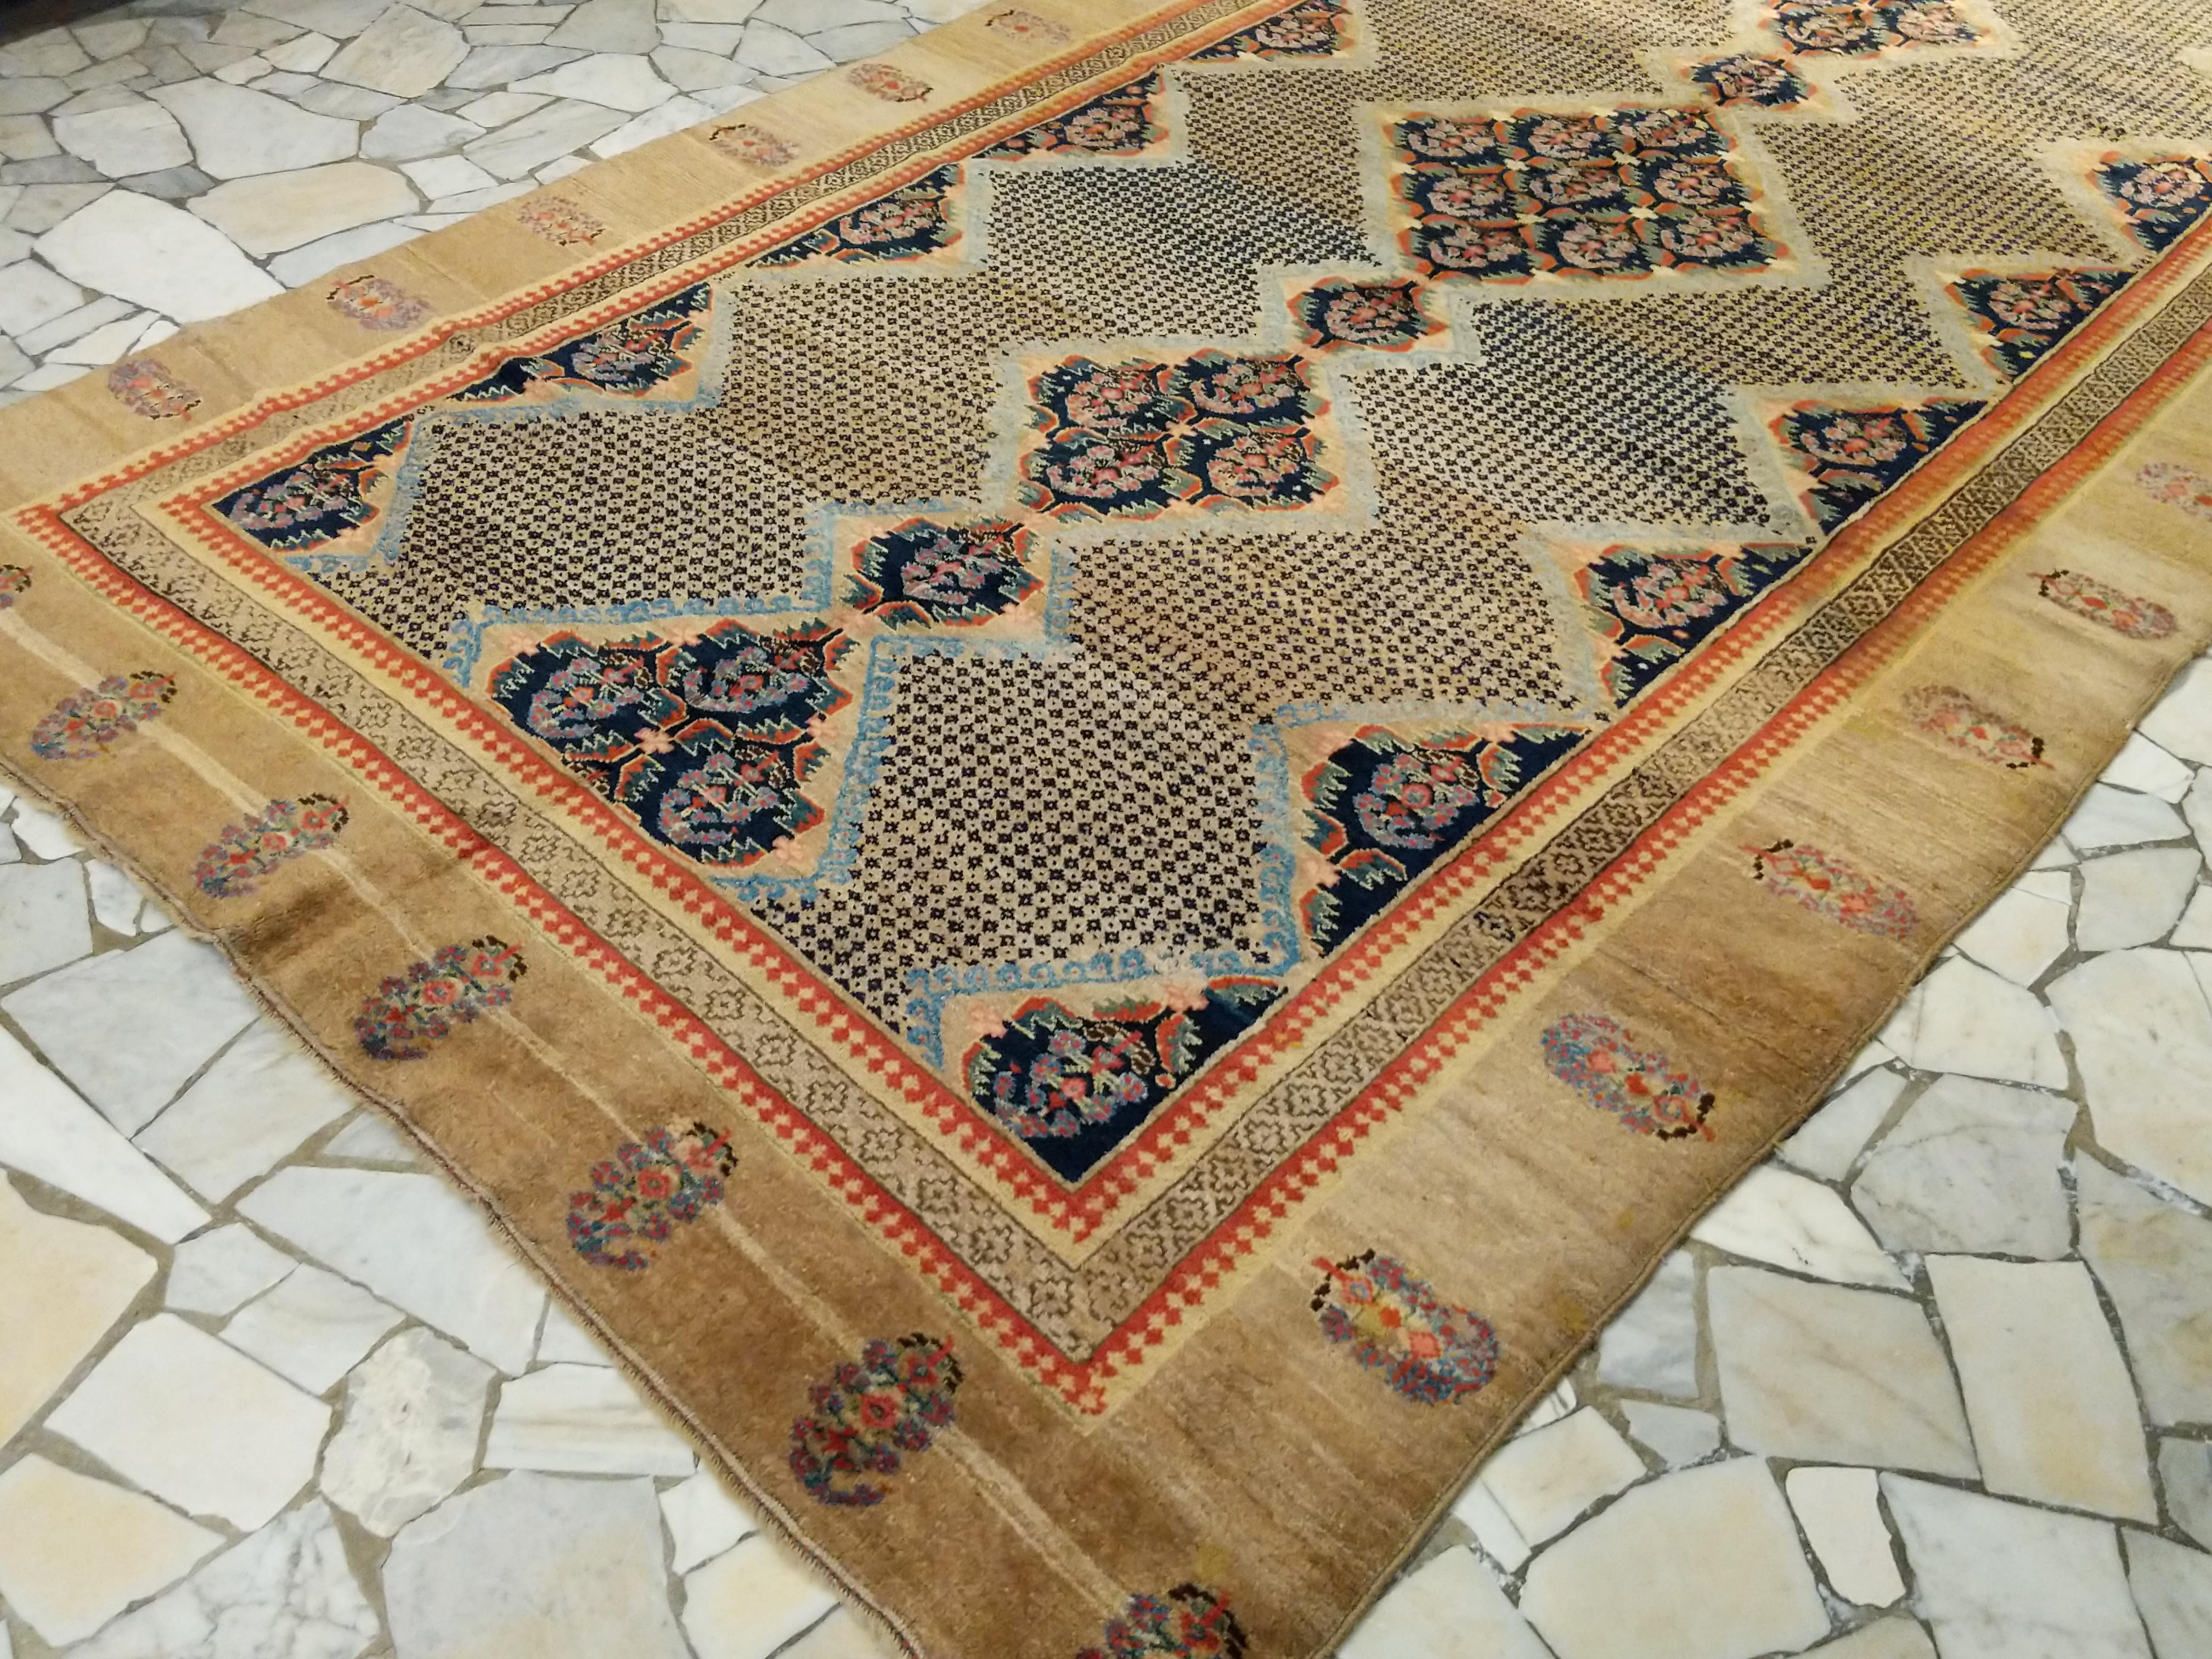 Bakshaish Antique Sarab Camel Hair Rug with Paisleys and Dotted Motifs For Sale